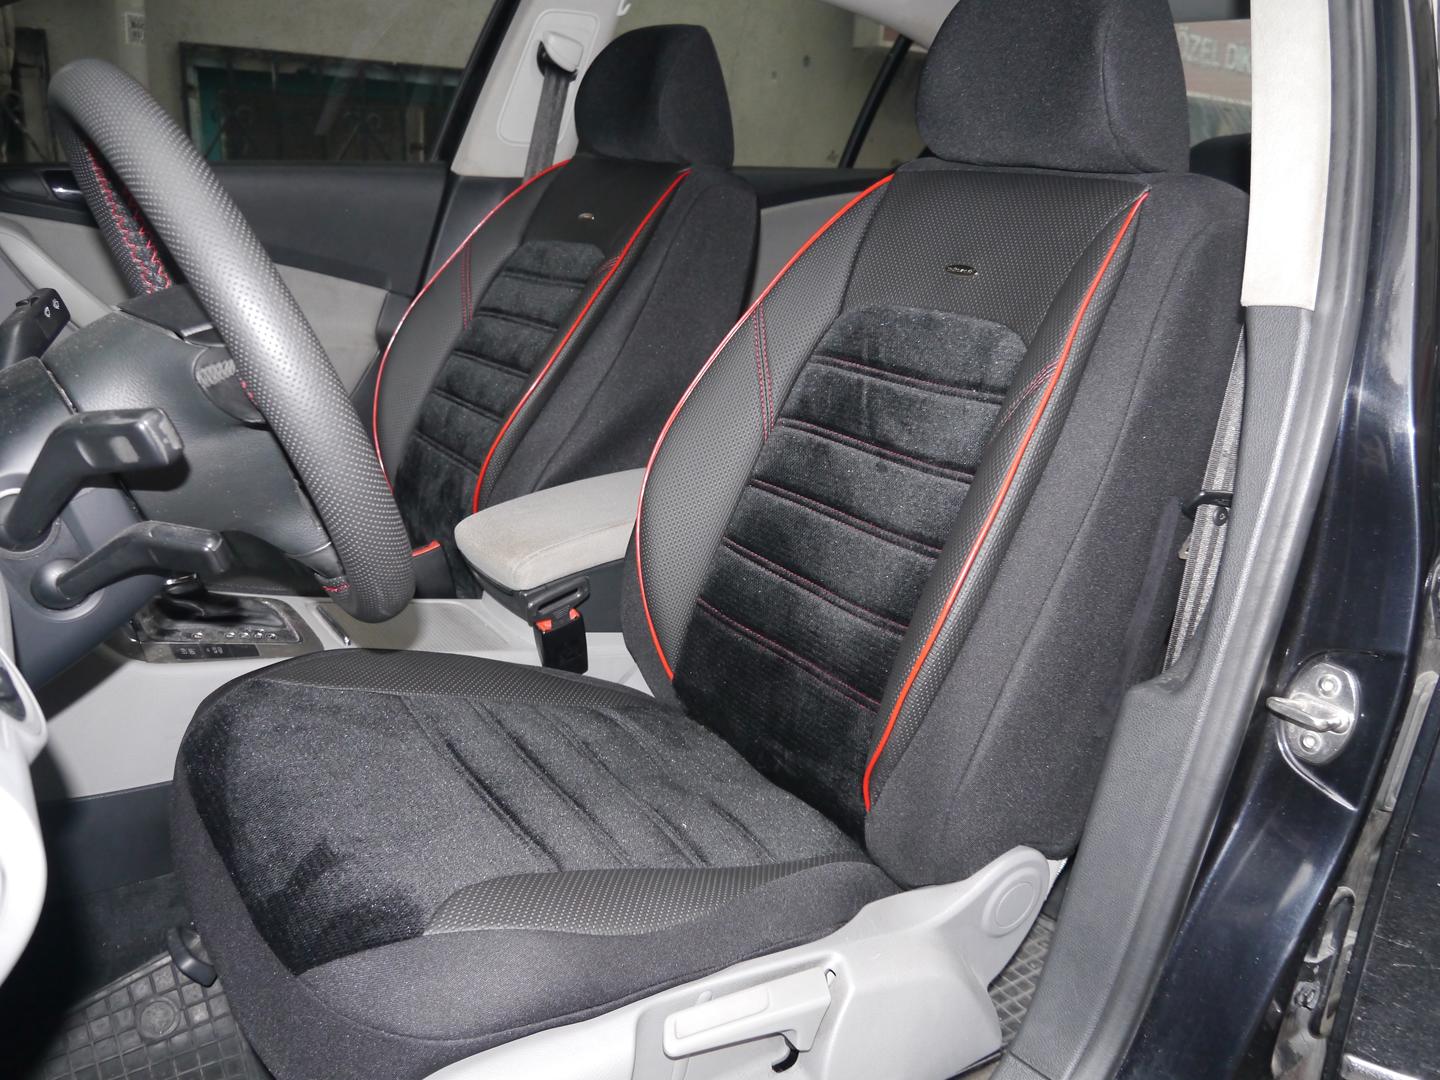 Car Seat Covers Protectors For Vw Golf Mk7 Estate No4a - Official Vw Golf Seat Covers